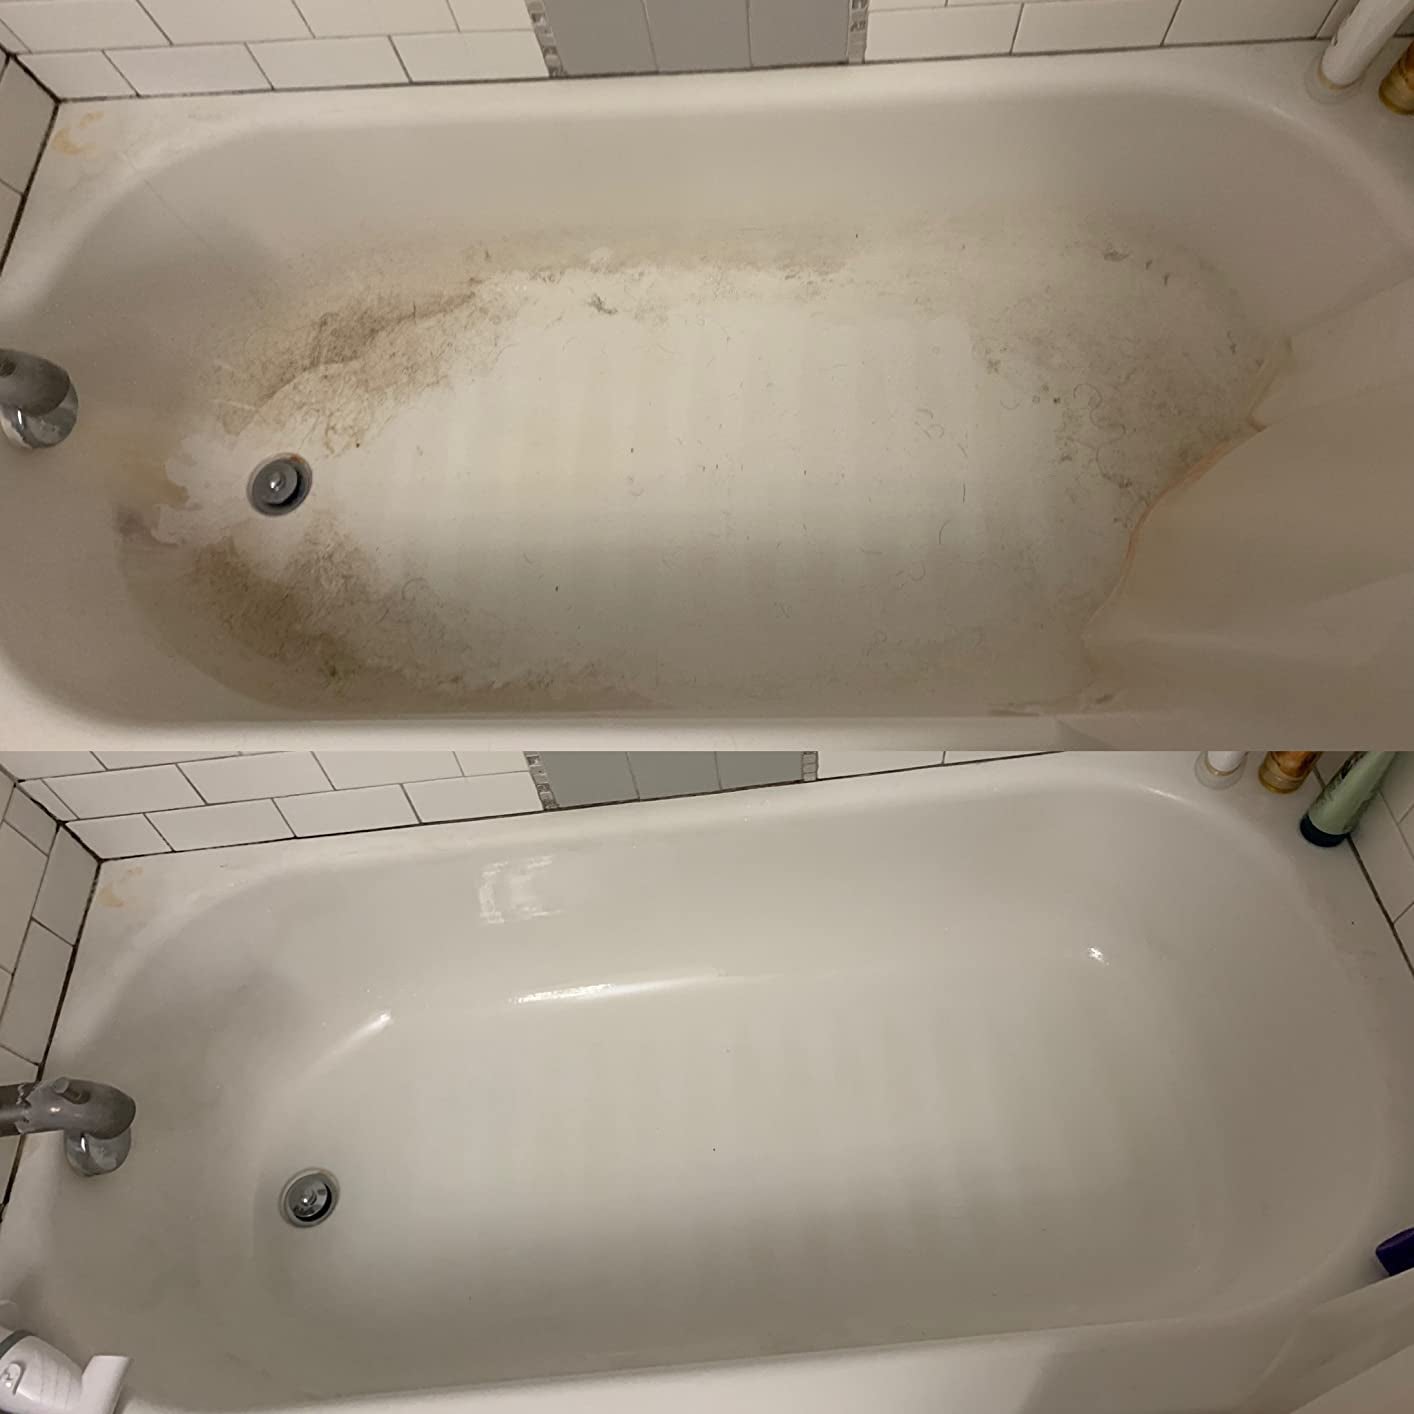 A reviewer's bathtub with visible dirt and the same tub after being cleaned with the spin brush